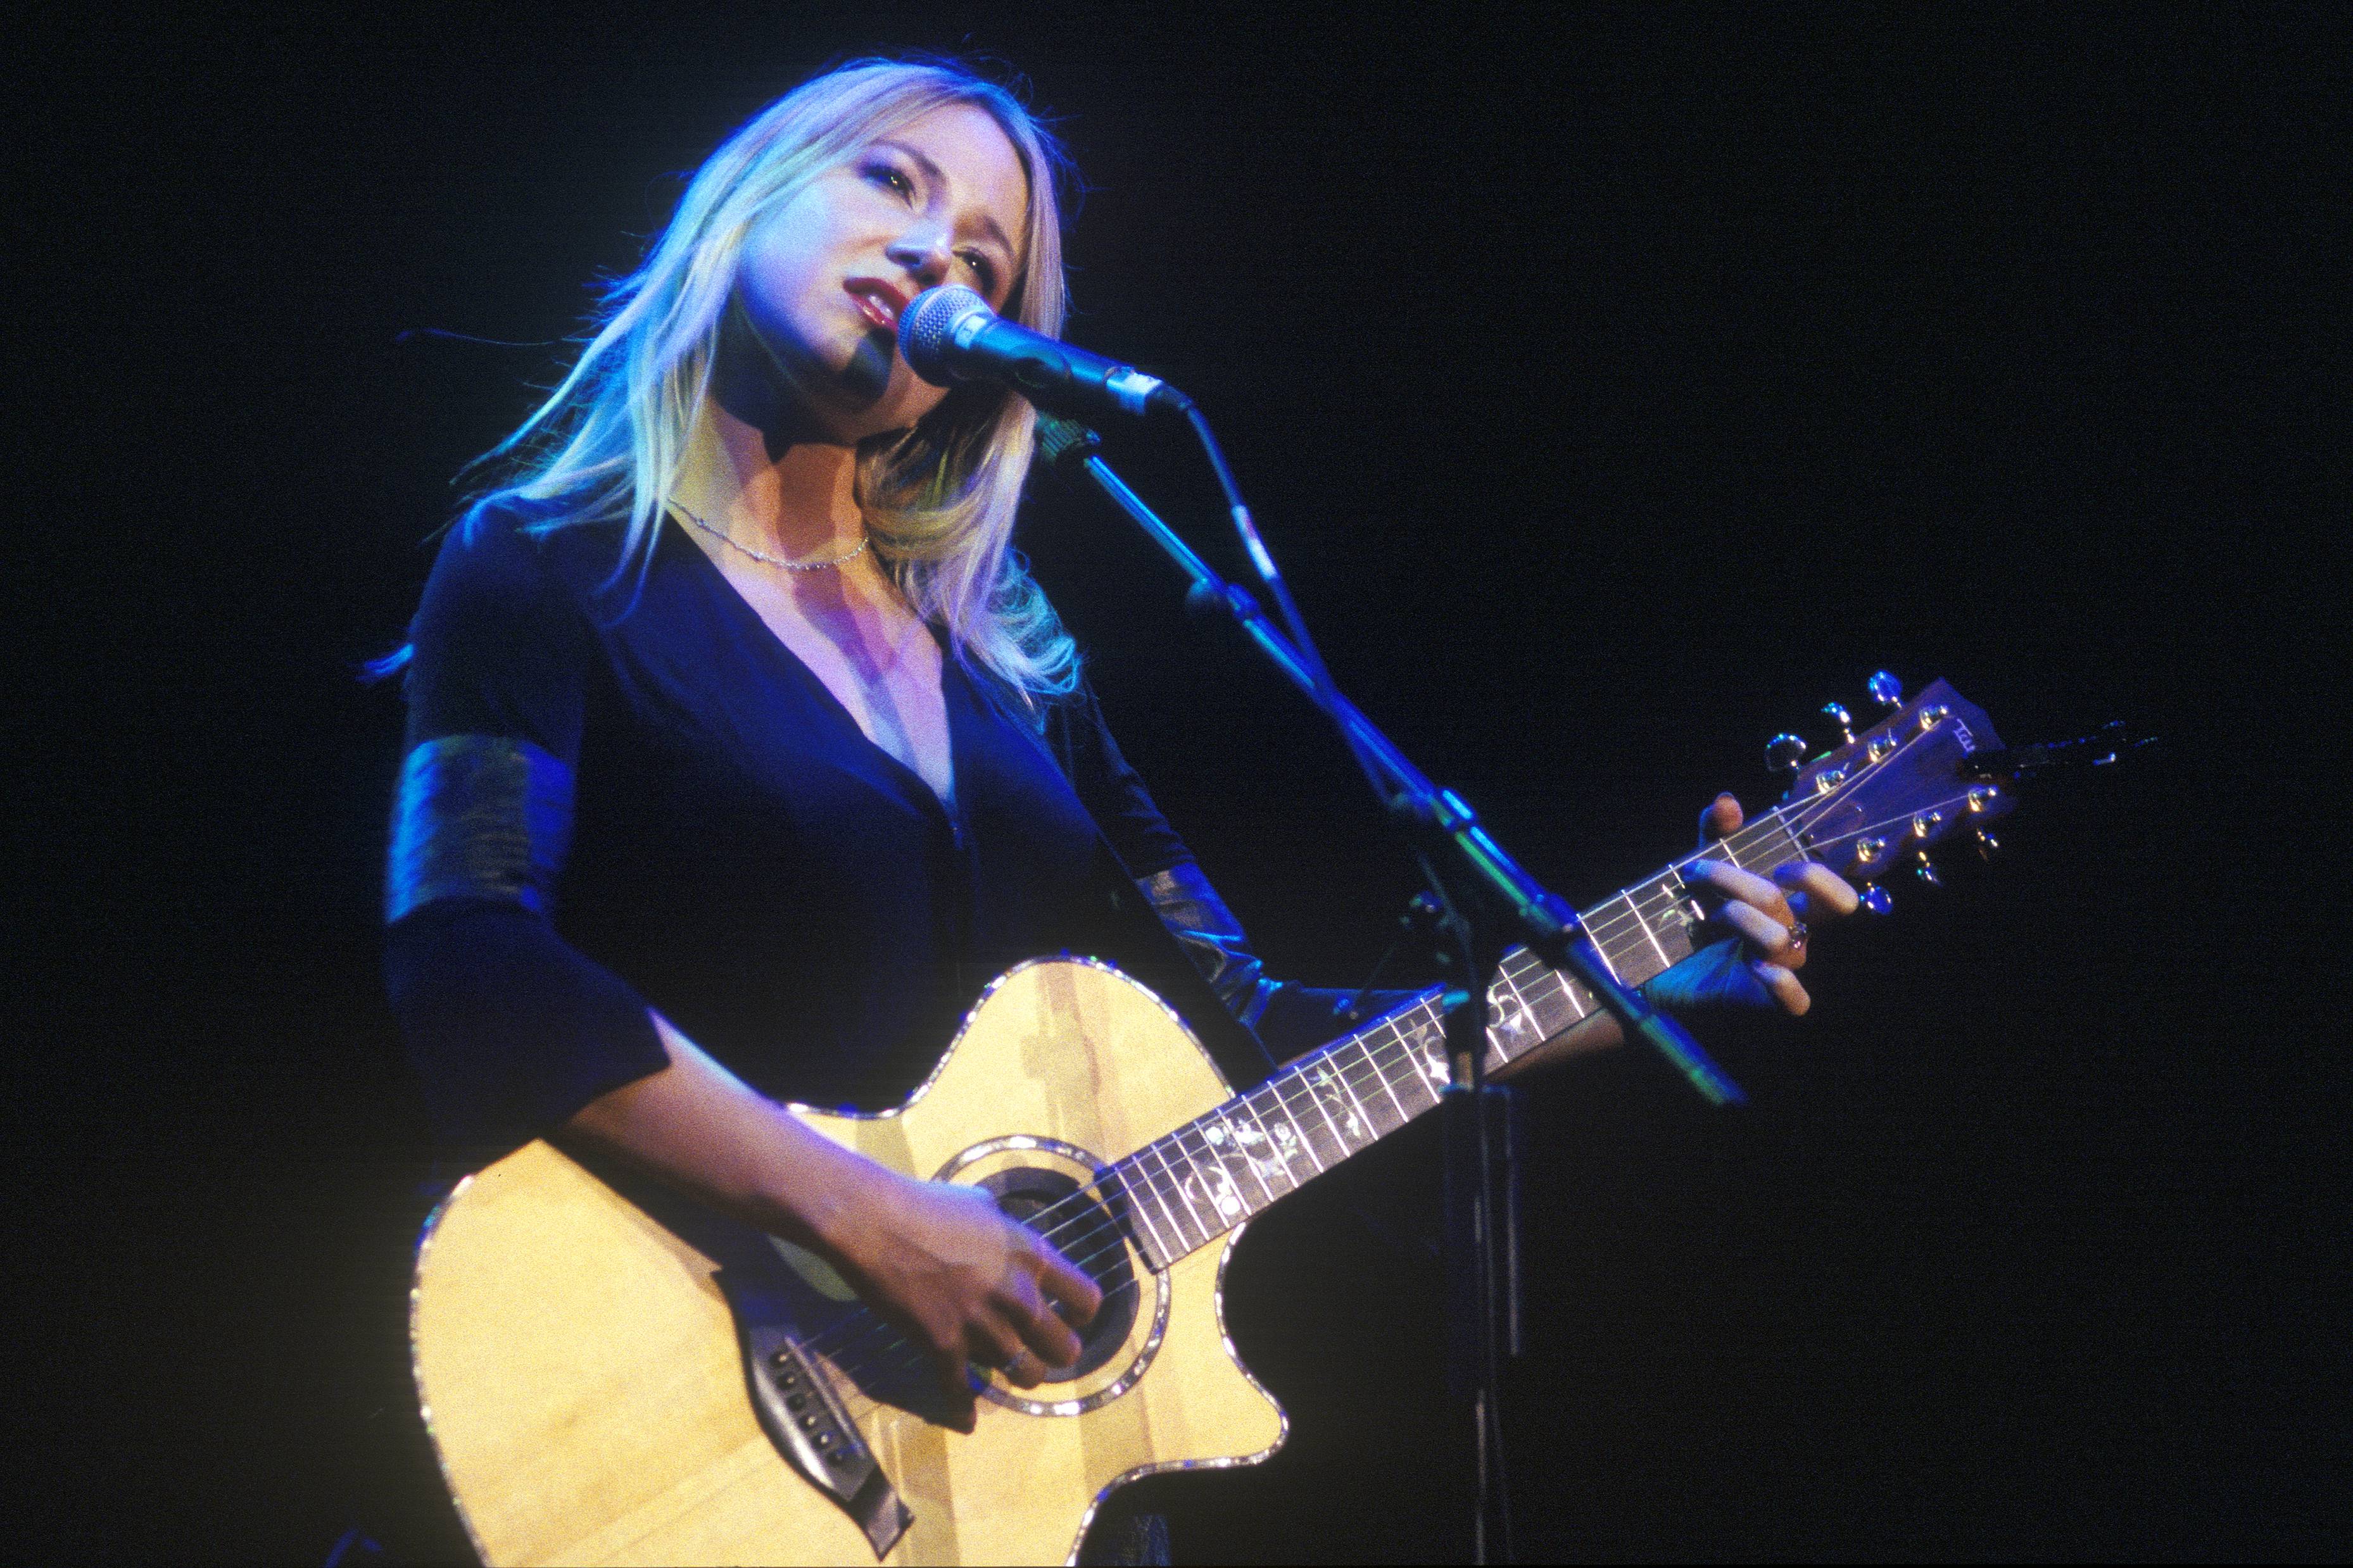 Jewel singing songs with her guitar